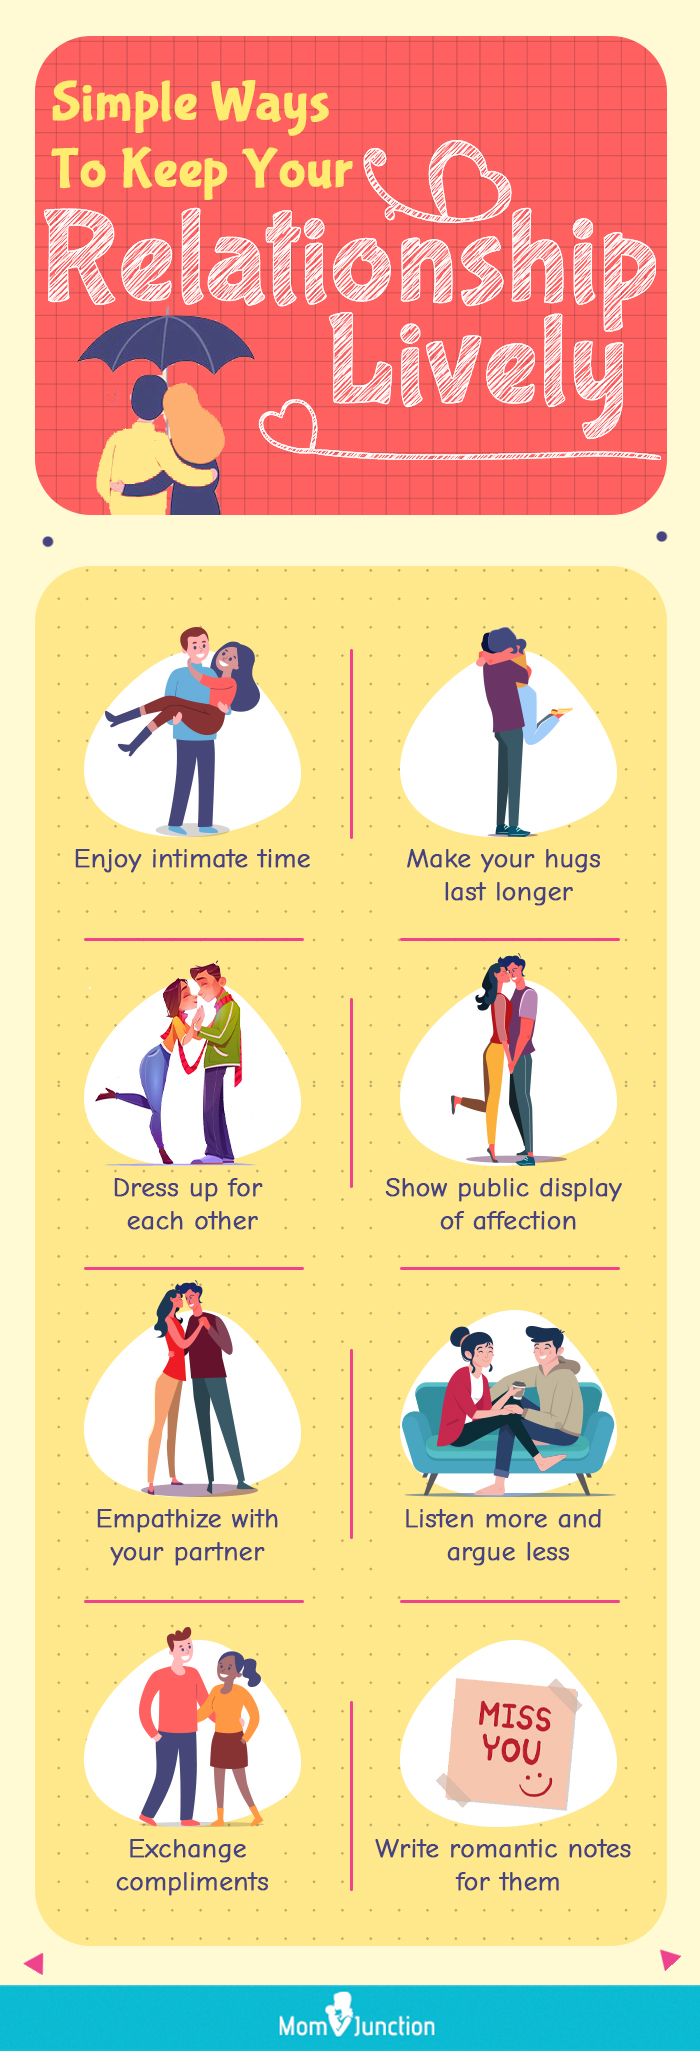 simple ways to keep your relationship lively [infographic]